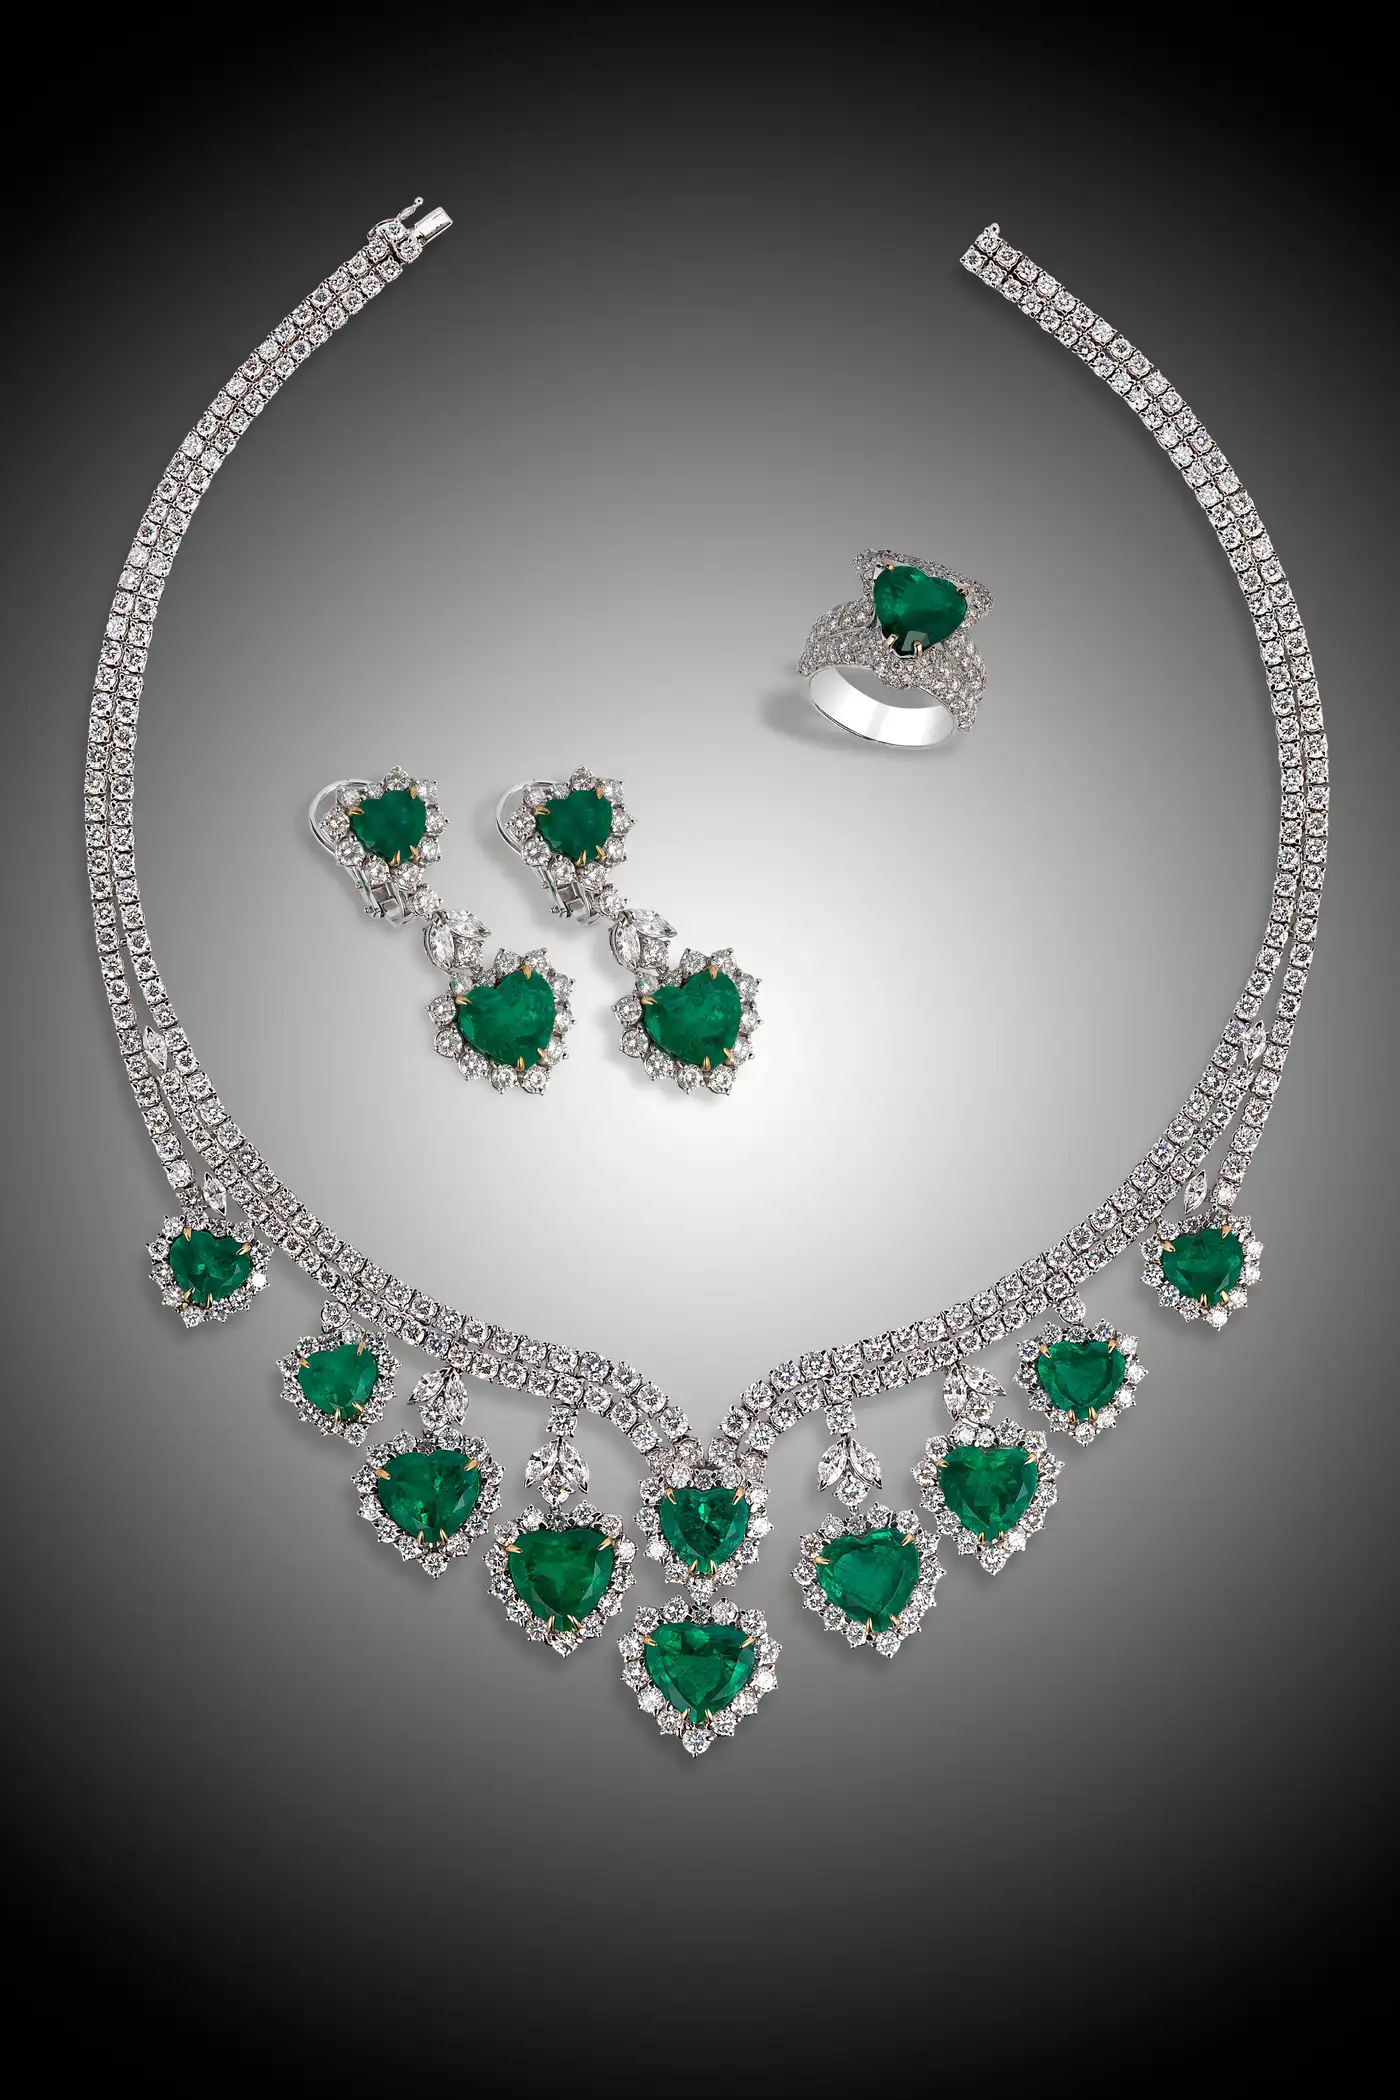 Andreoli-Heart-Shape-Colombian-Emerald-Diamond-Necklace-CDC-Certified-18Kt-Gold-6.webp